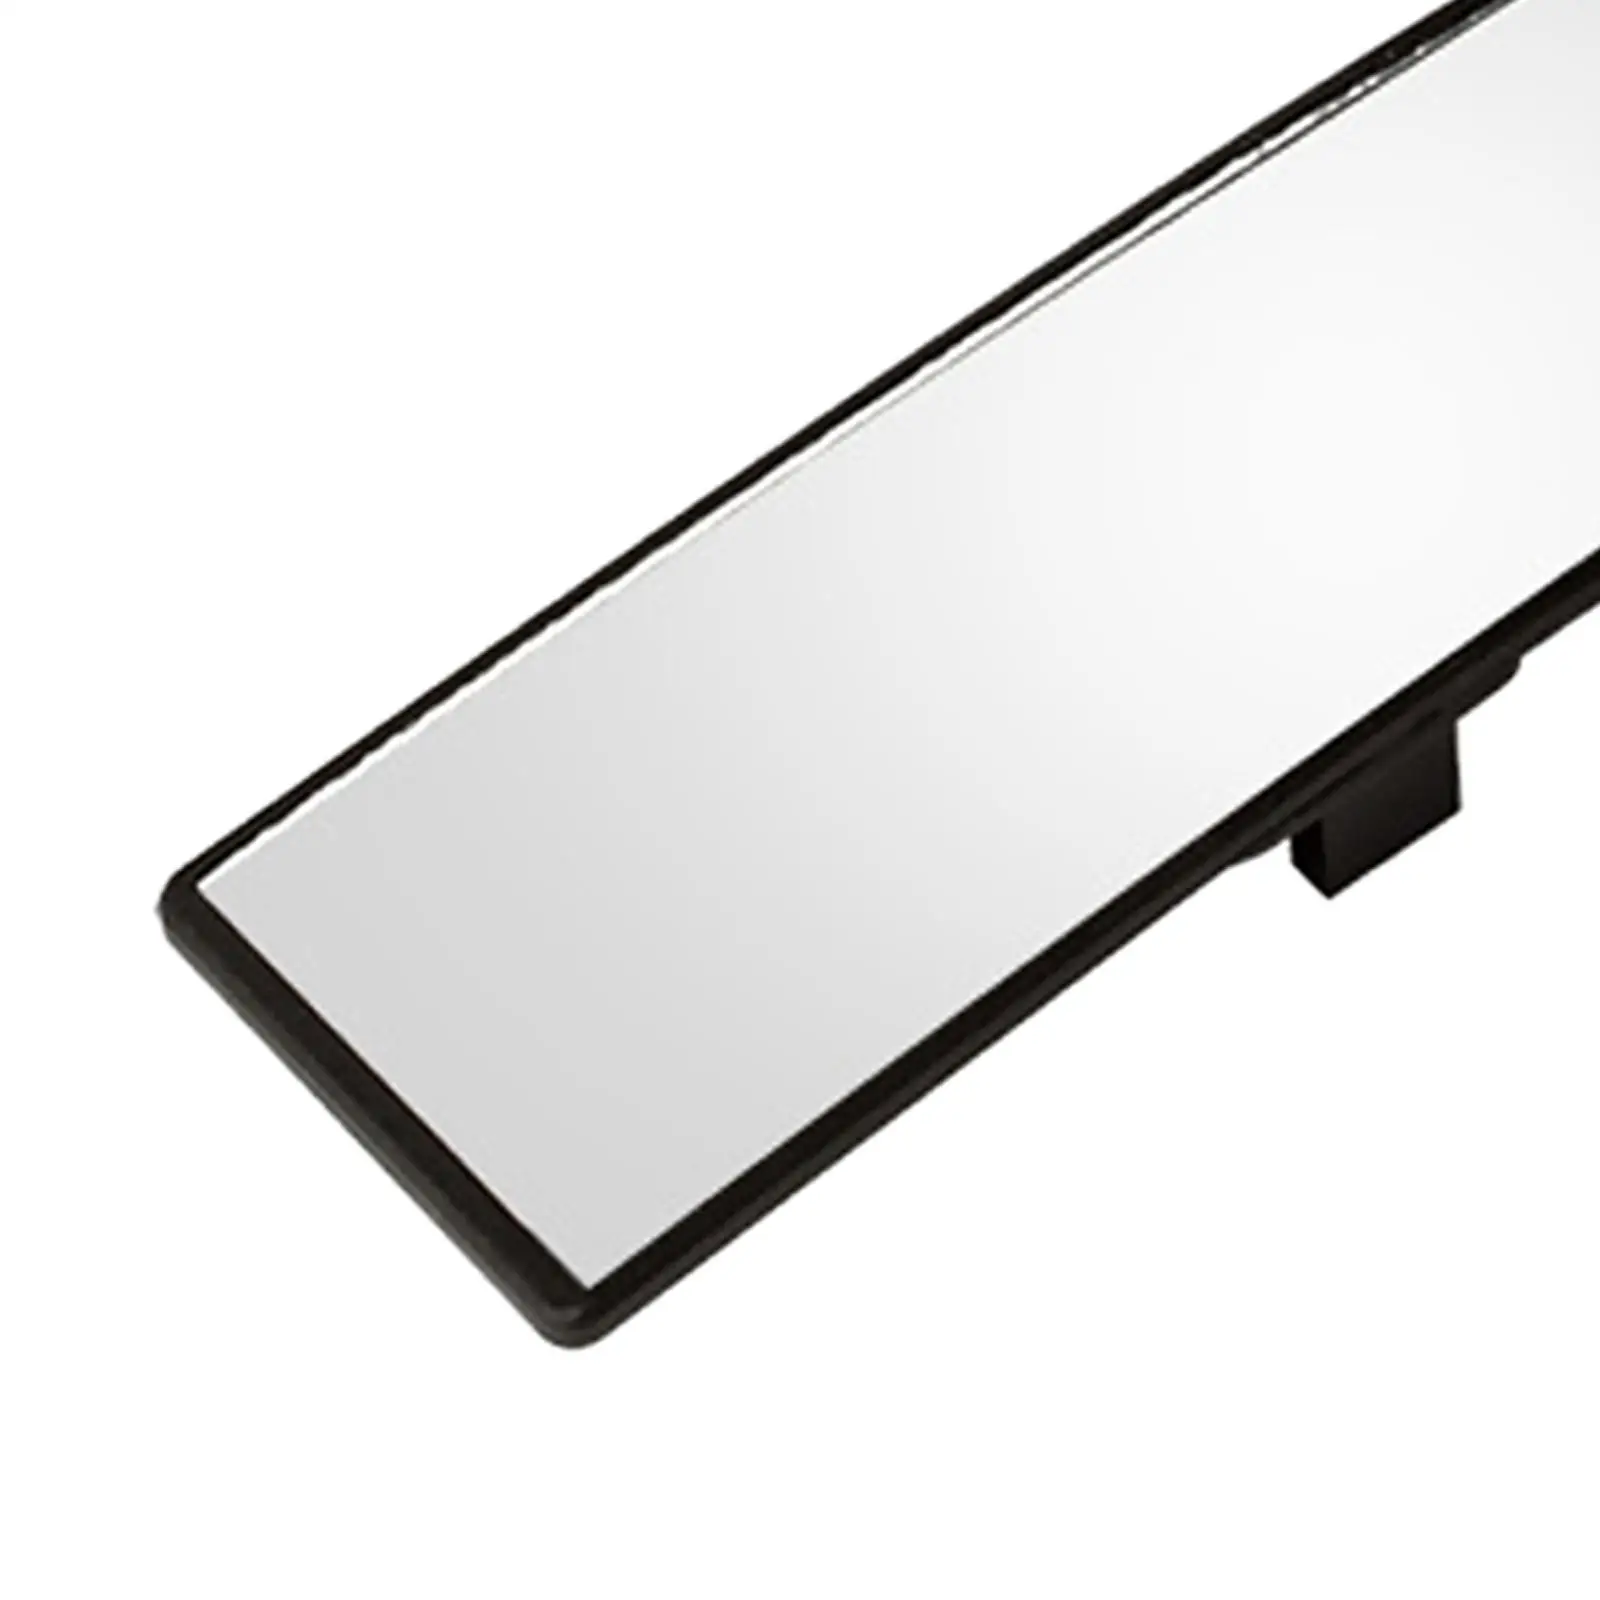 Rear View Mirror 11.2 inch Interior Accessories Panoramic Rearview Mirror Clear View for Automobile Vehicles Trucks Van Car